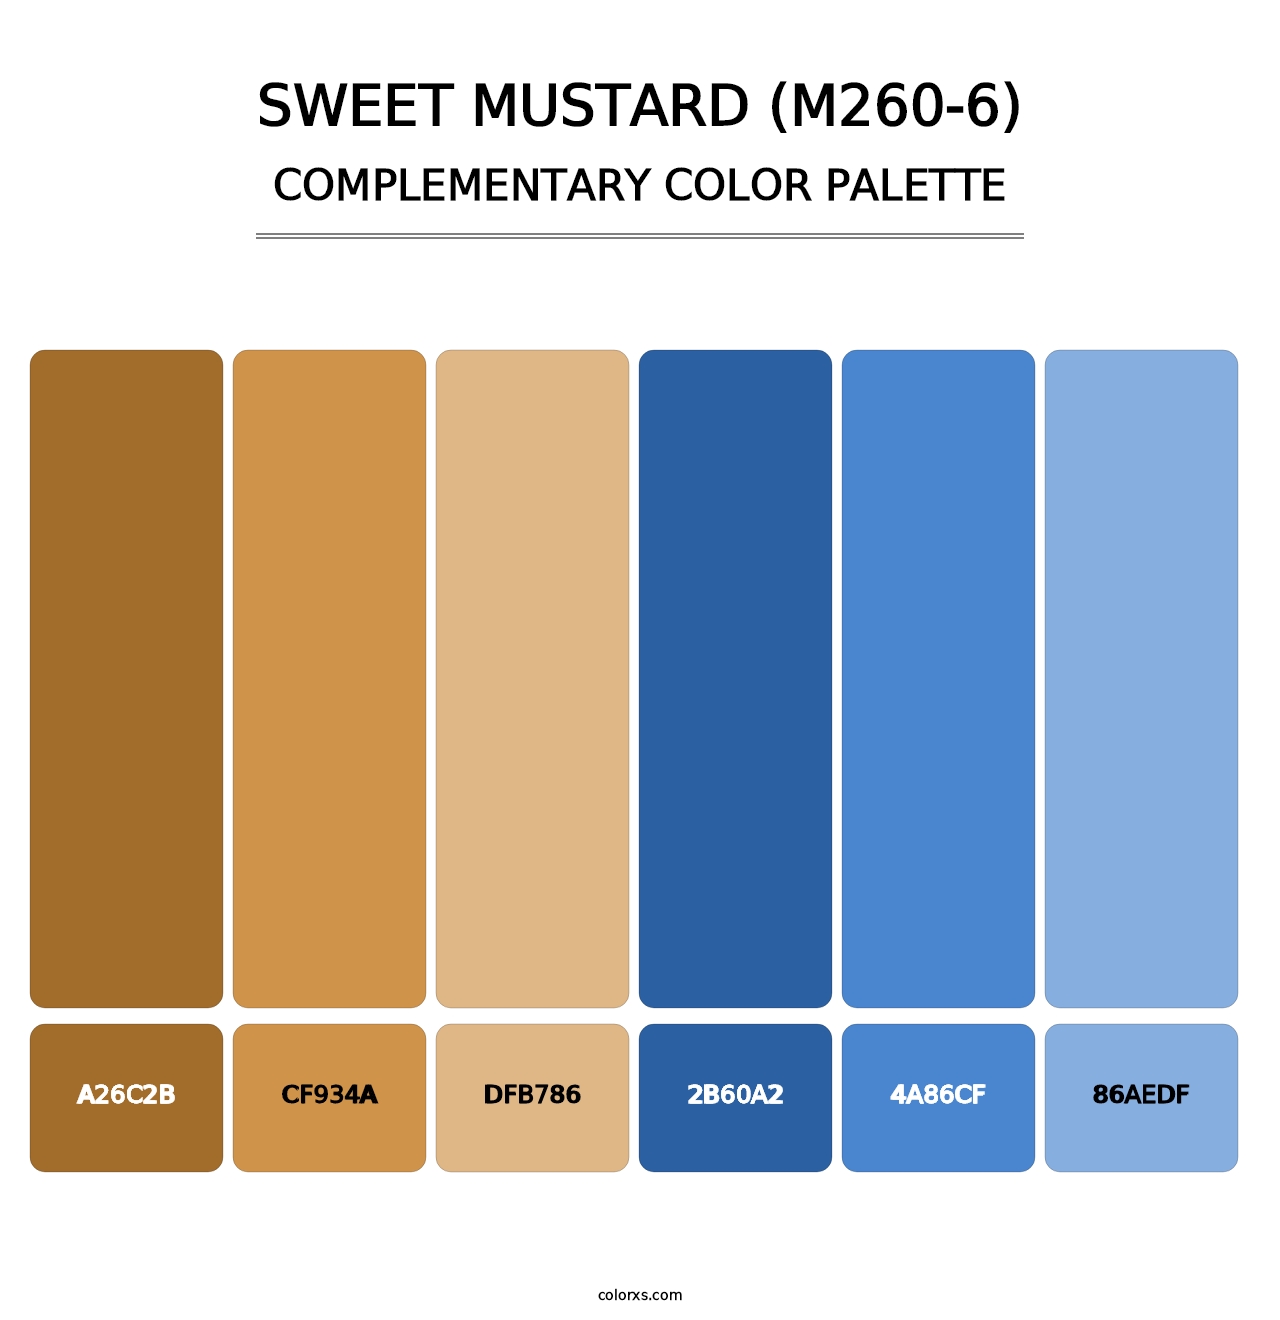 Sweet Mustard (M260-6) - Complementary Color Palette